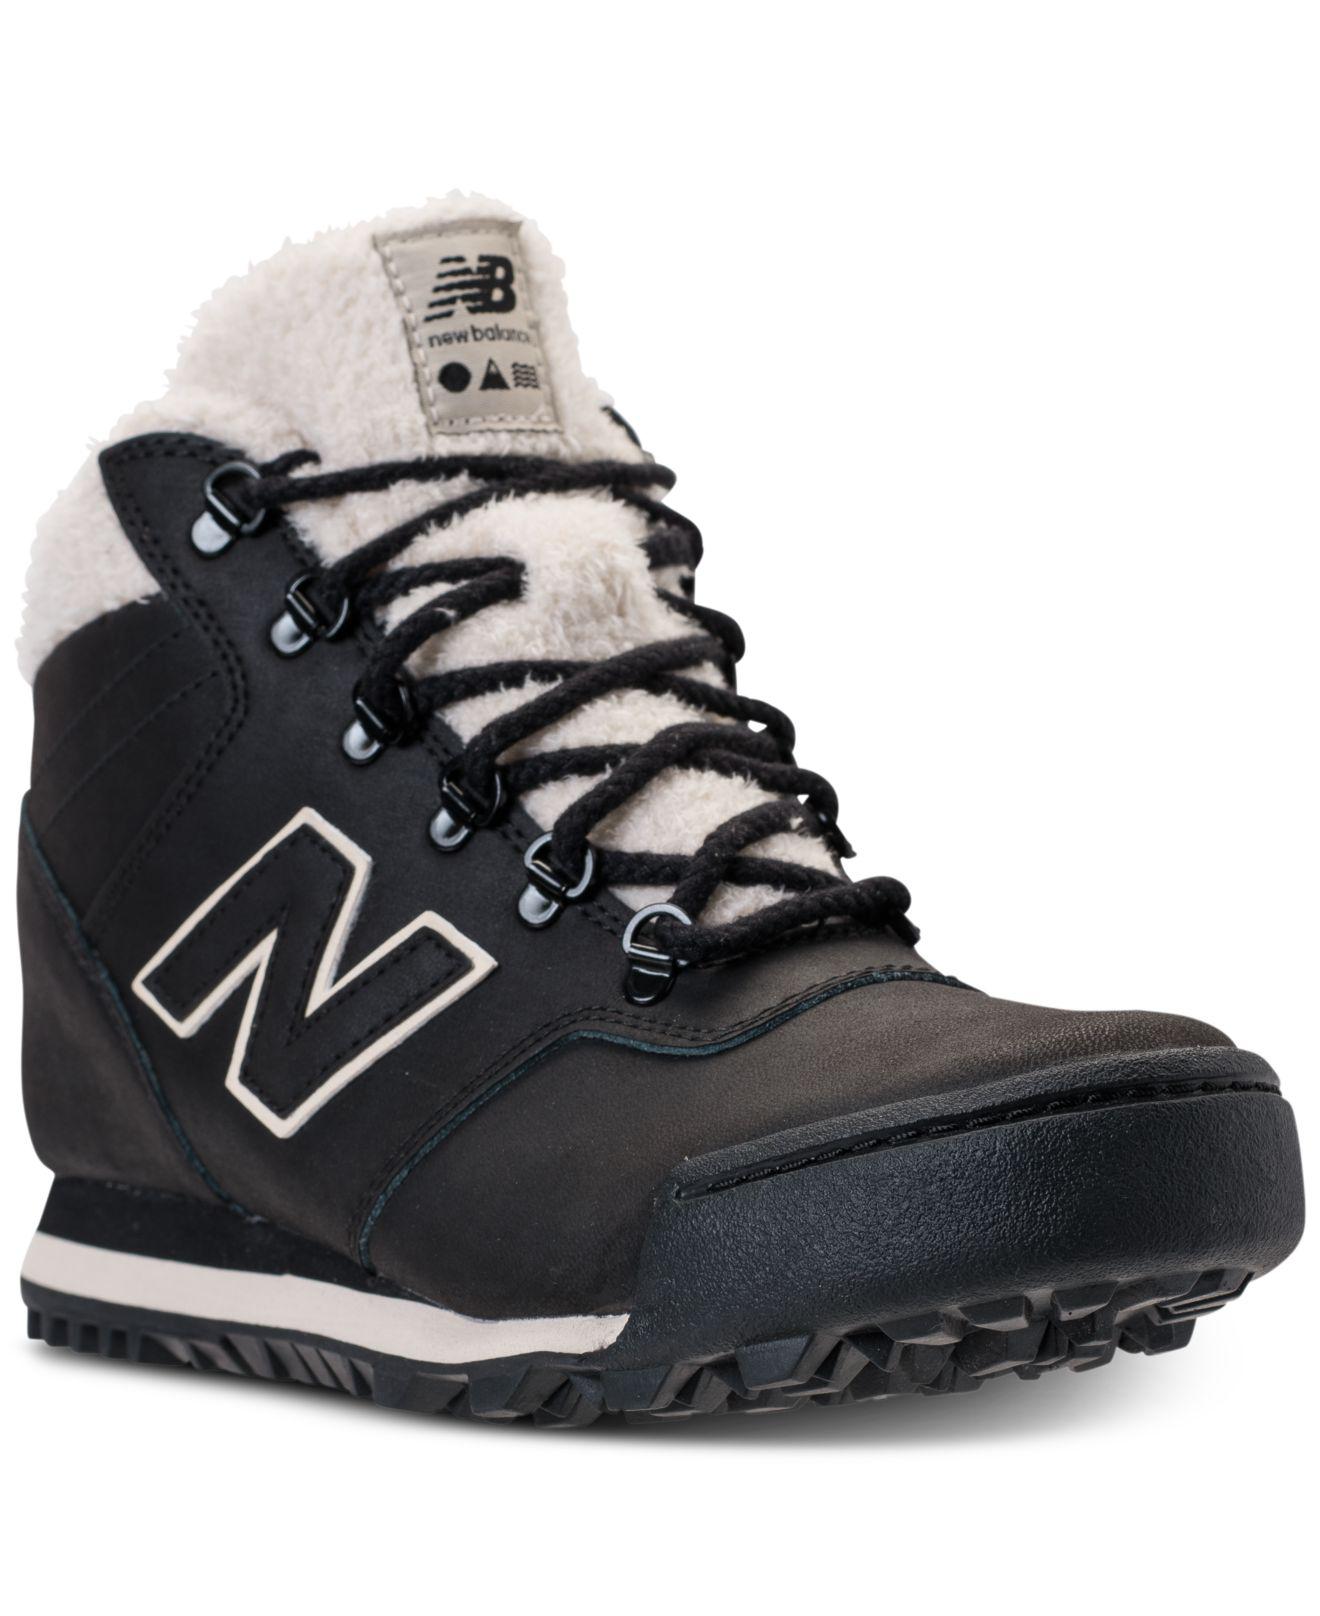 New Balance Leather Women's 701 Outdoor Sneaker Boots From Finish ...